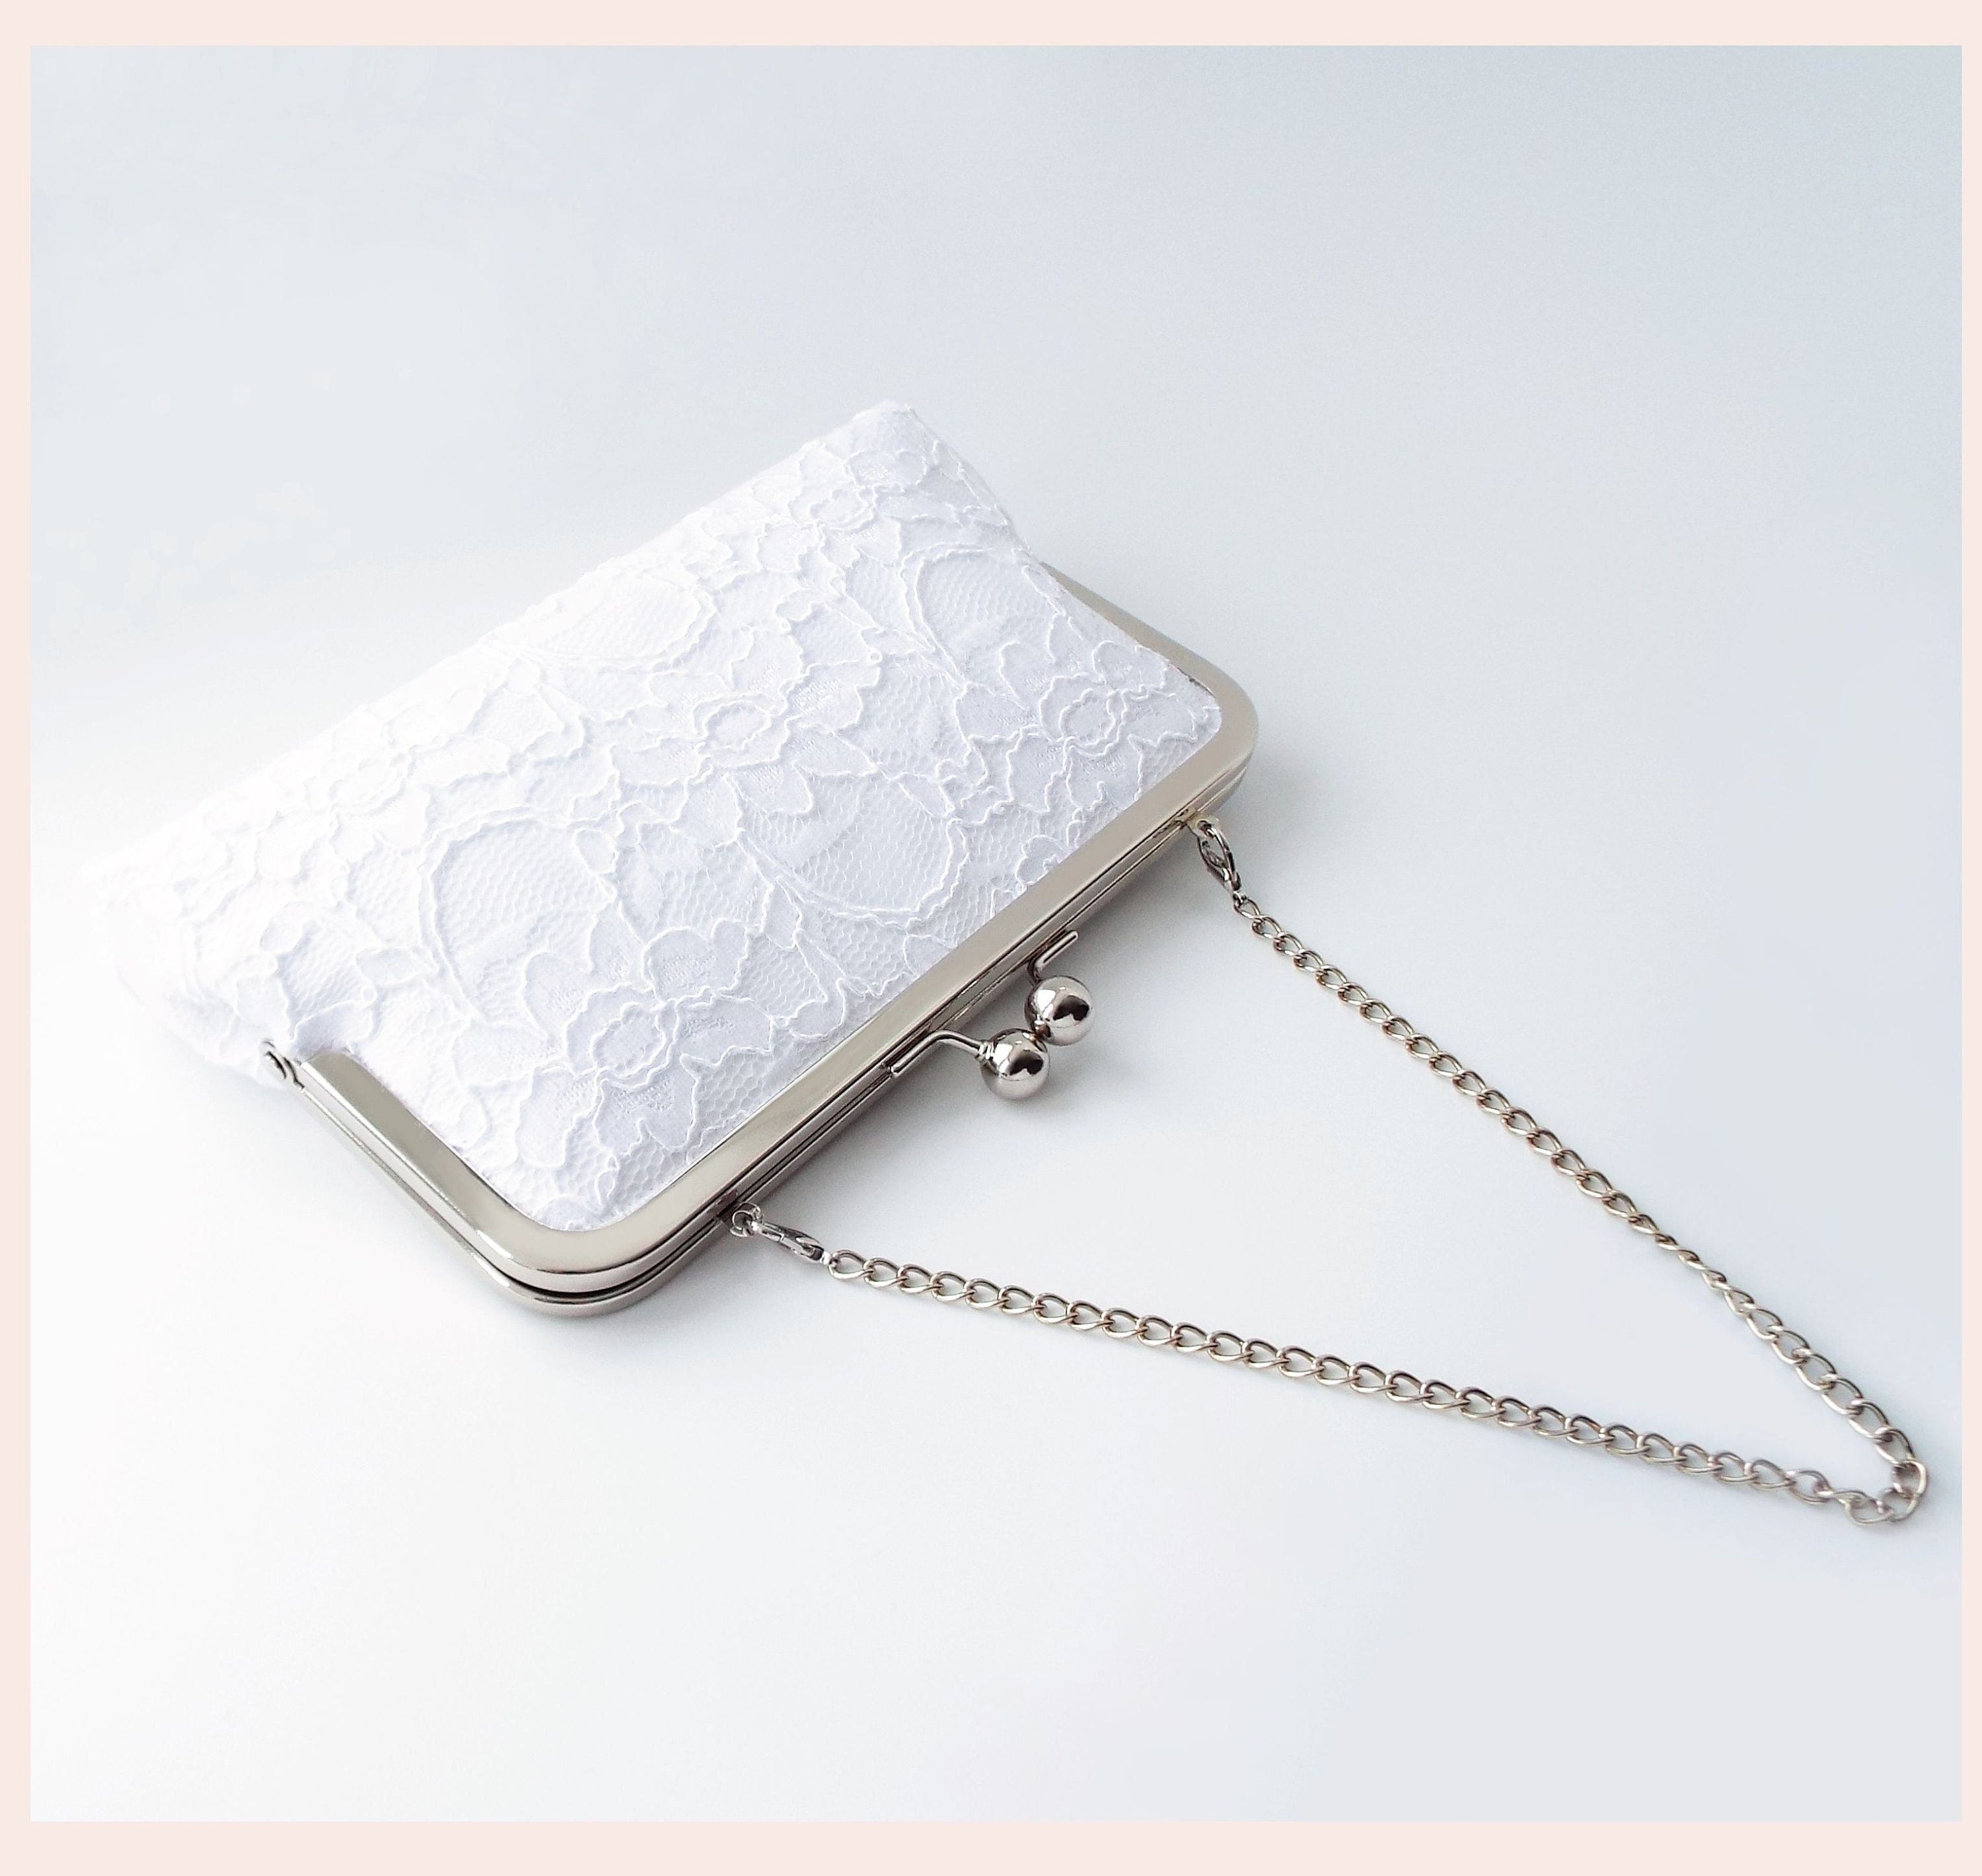 White Satin Bow Fairy Clutch With Metal Handle Perfect For Weddings,  Parties, And Bridal Wear Ivory Satin Evening Bag With Chain Shoulder Strap  Style 231013 From Tie03, $15.91 | DHgate.Com